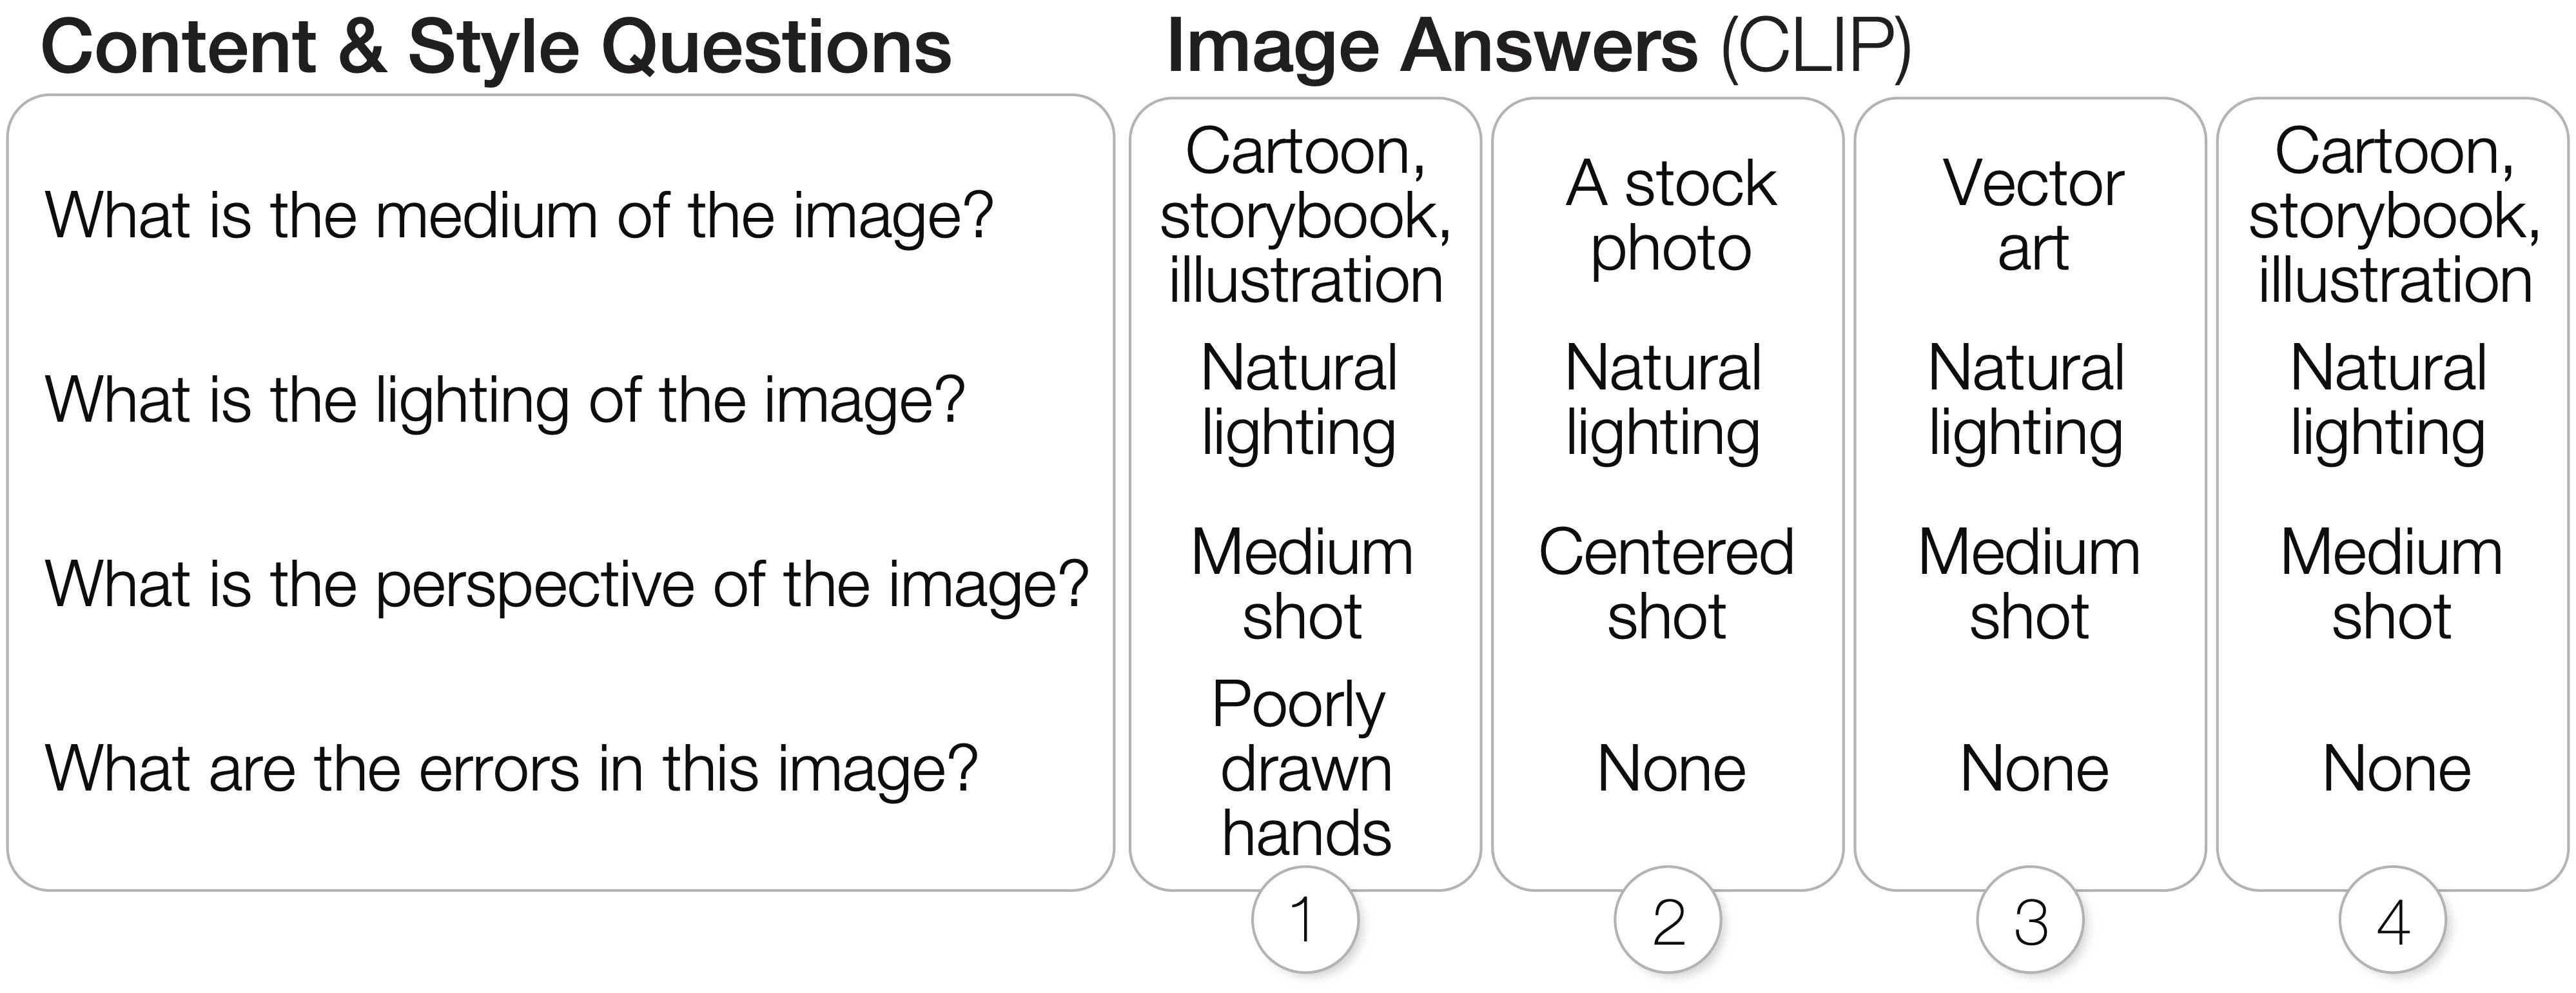 This figures shows the answers related to content and style of the images that were retrieved using CLIP model. First for the medium of the image, image 1 answers cartoon, storybook, and illustration, image 2 answers a stock photo, image 3 answers vector art, and image 4 answers cartoon, storybook, and illustration. For the lighting of the image, all four images answer natural lighting. For the perspective of the images, image 1, 3 and 4 answer medium shot while the second image answers centered shot. For the errors in the image, only image 1 answers poorly drawn hands but not other three images.